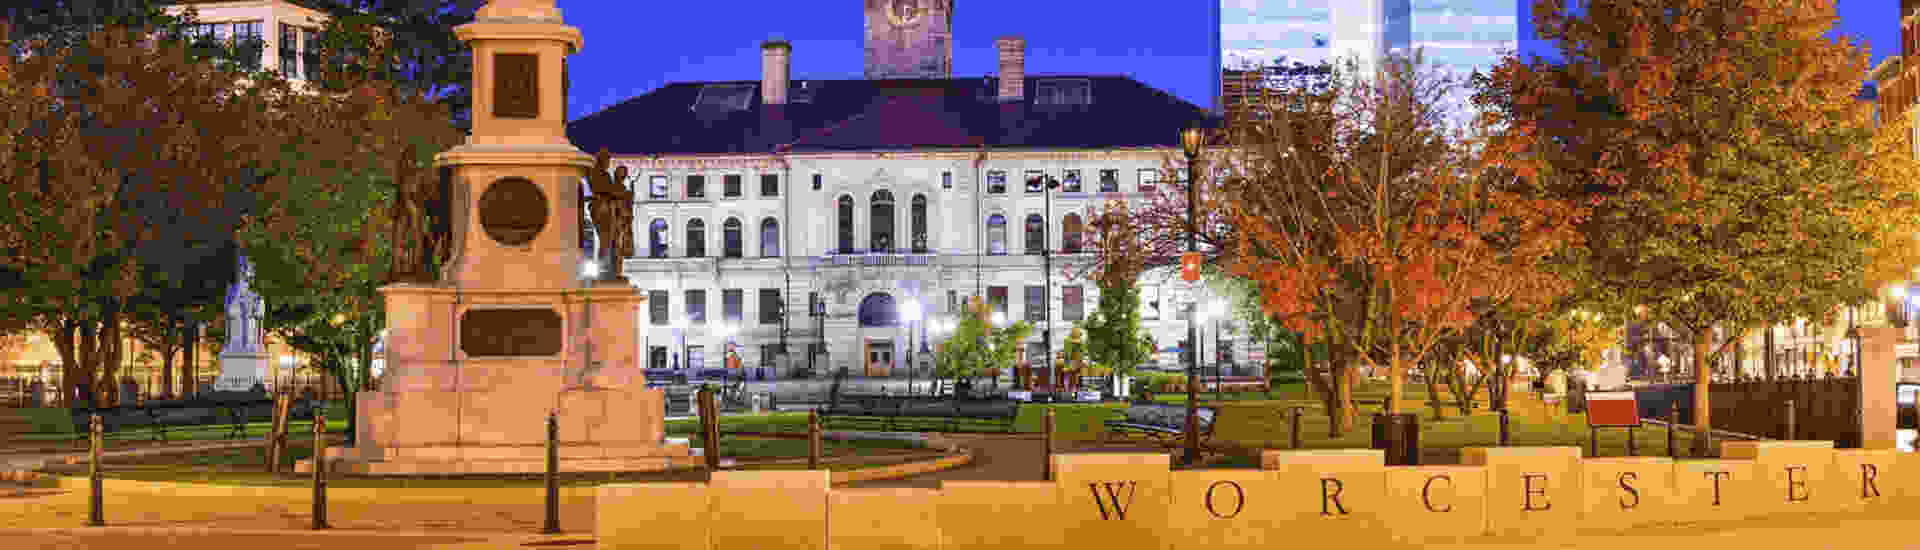 Wocester Common in Downtown Worcester, MA